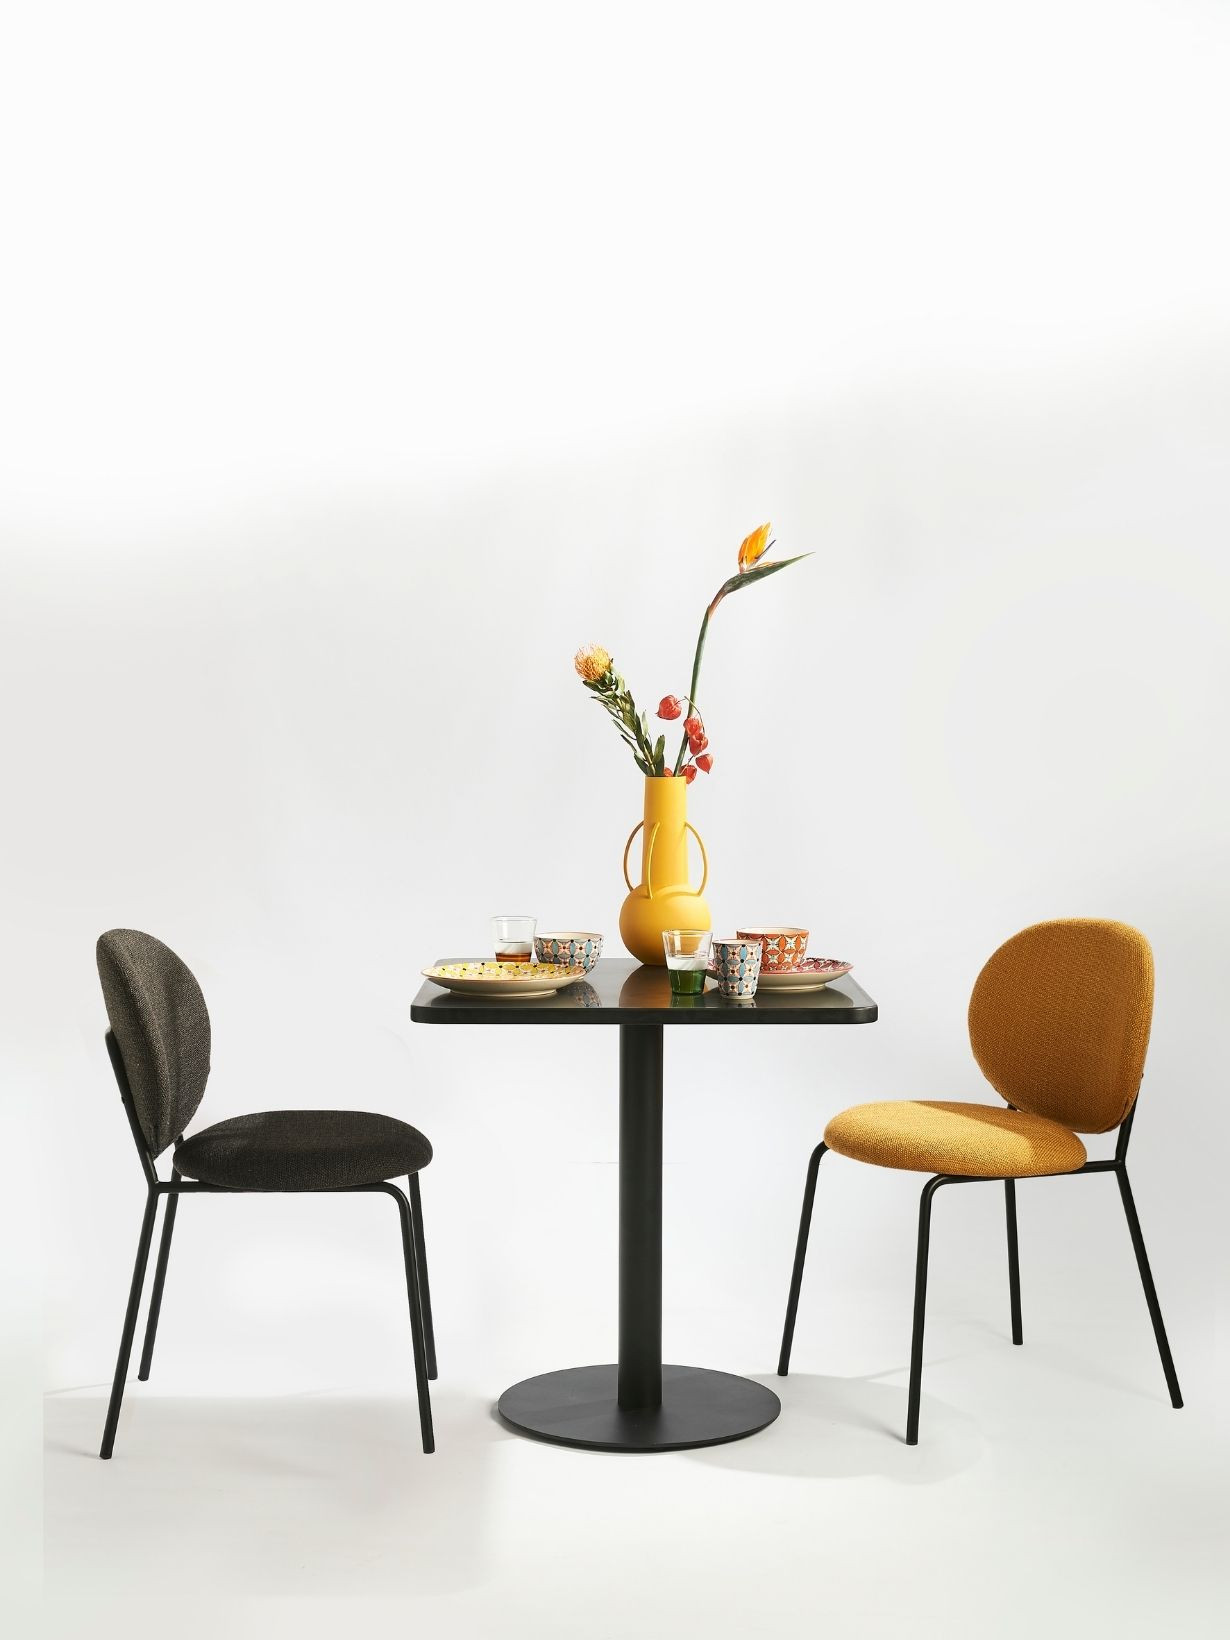 Simply Pols Potten chair in ochre fabric